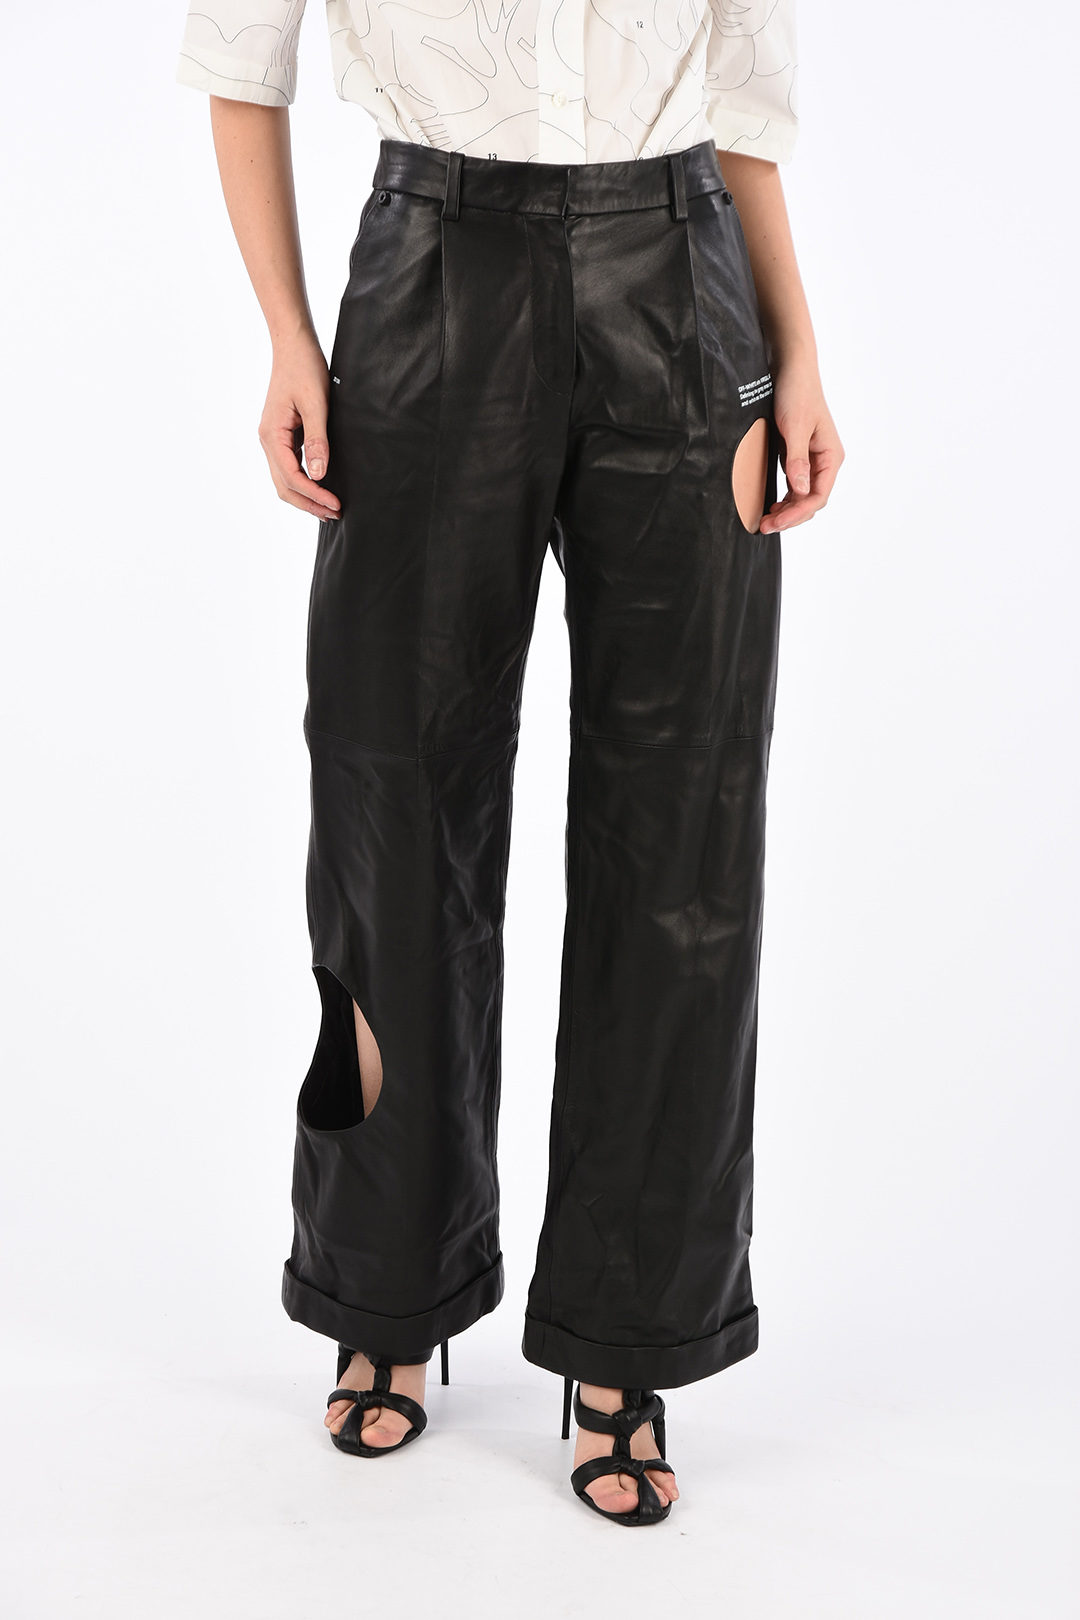 Off-White Cut Out Leather Palazzo Pants women - Glamood Outlet